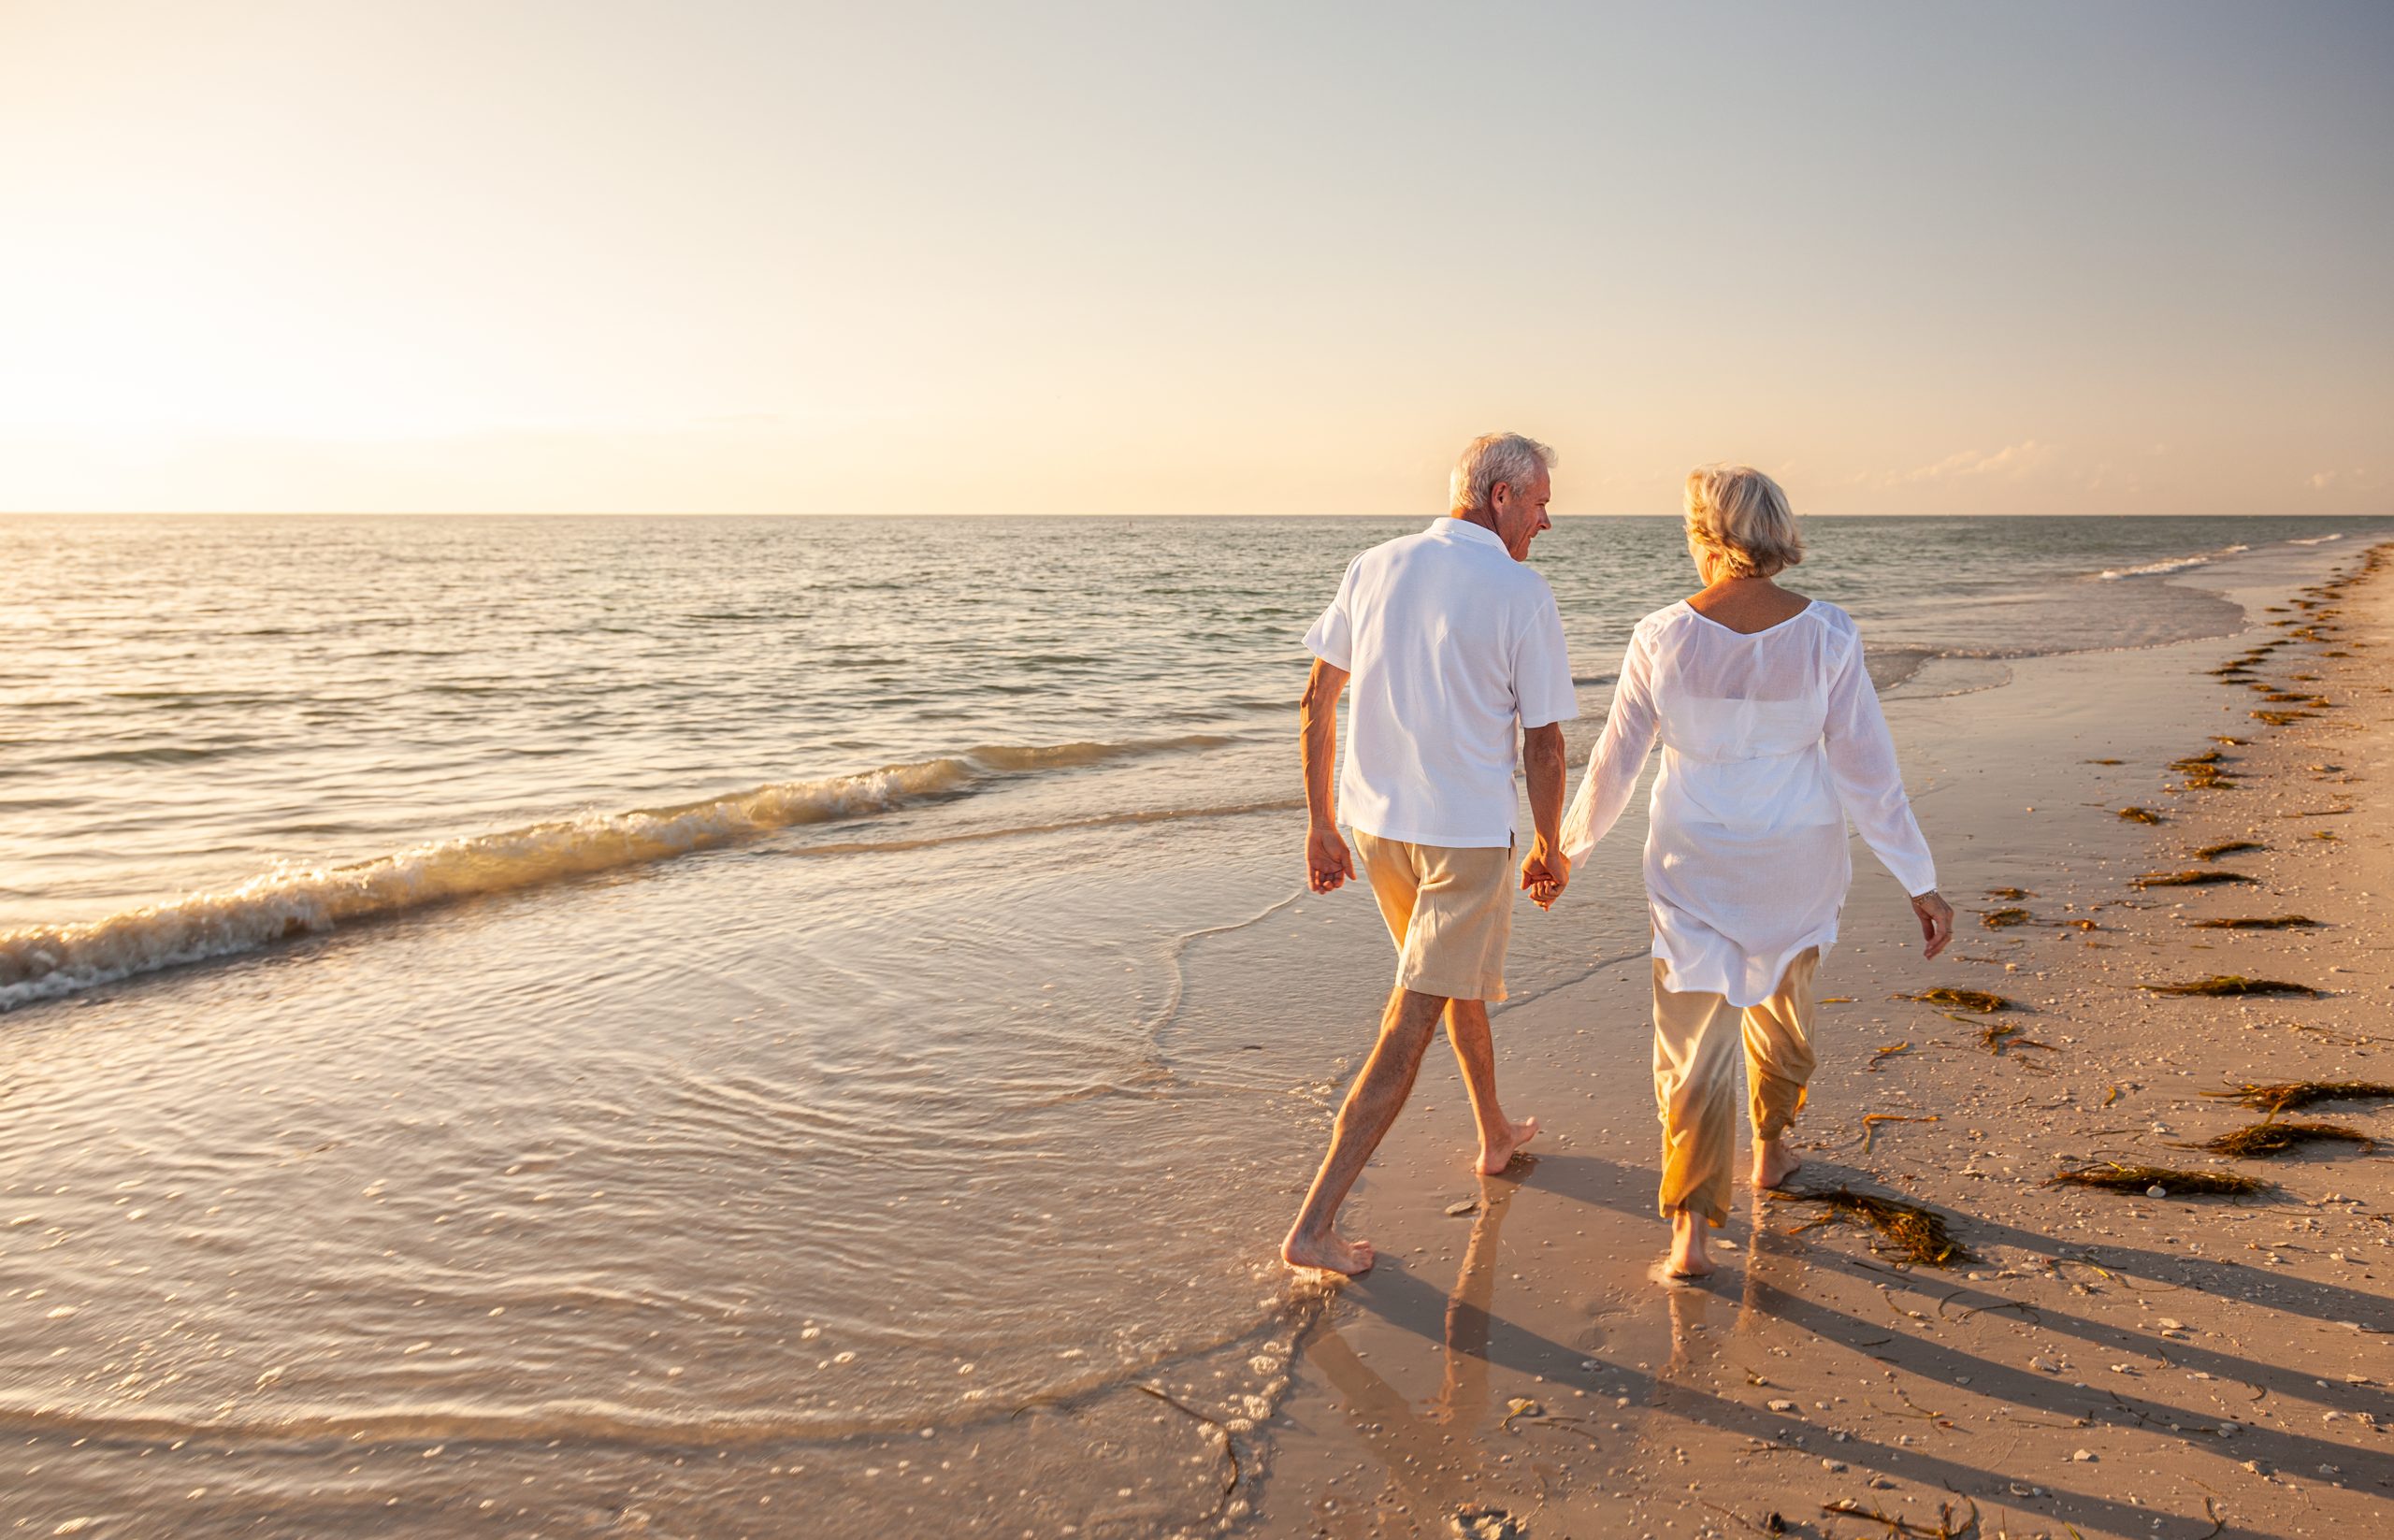 a man and woman are walking on the beach holding hands